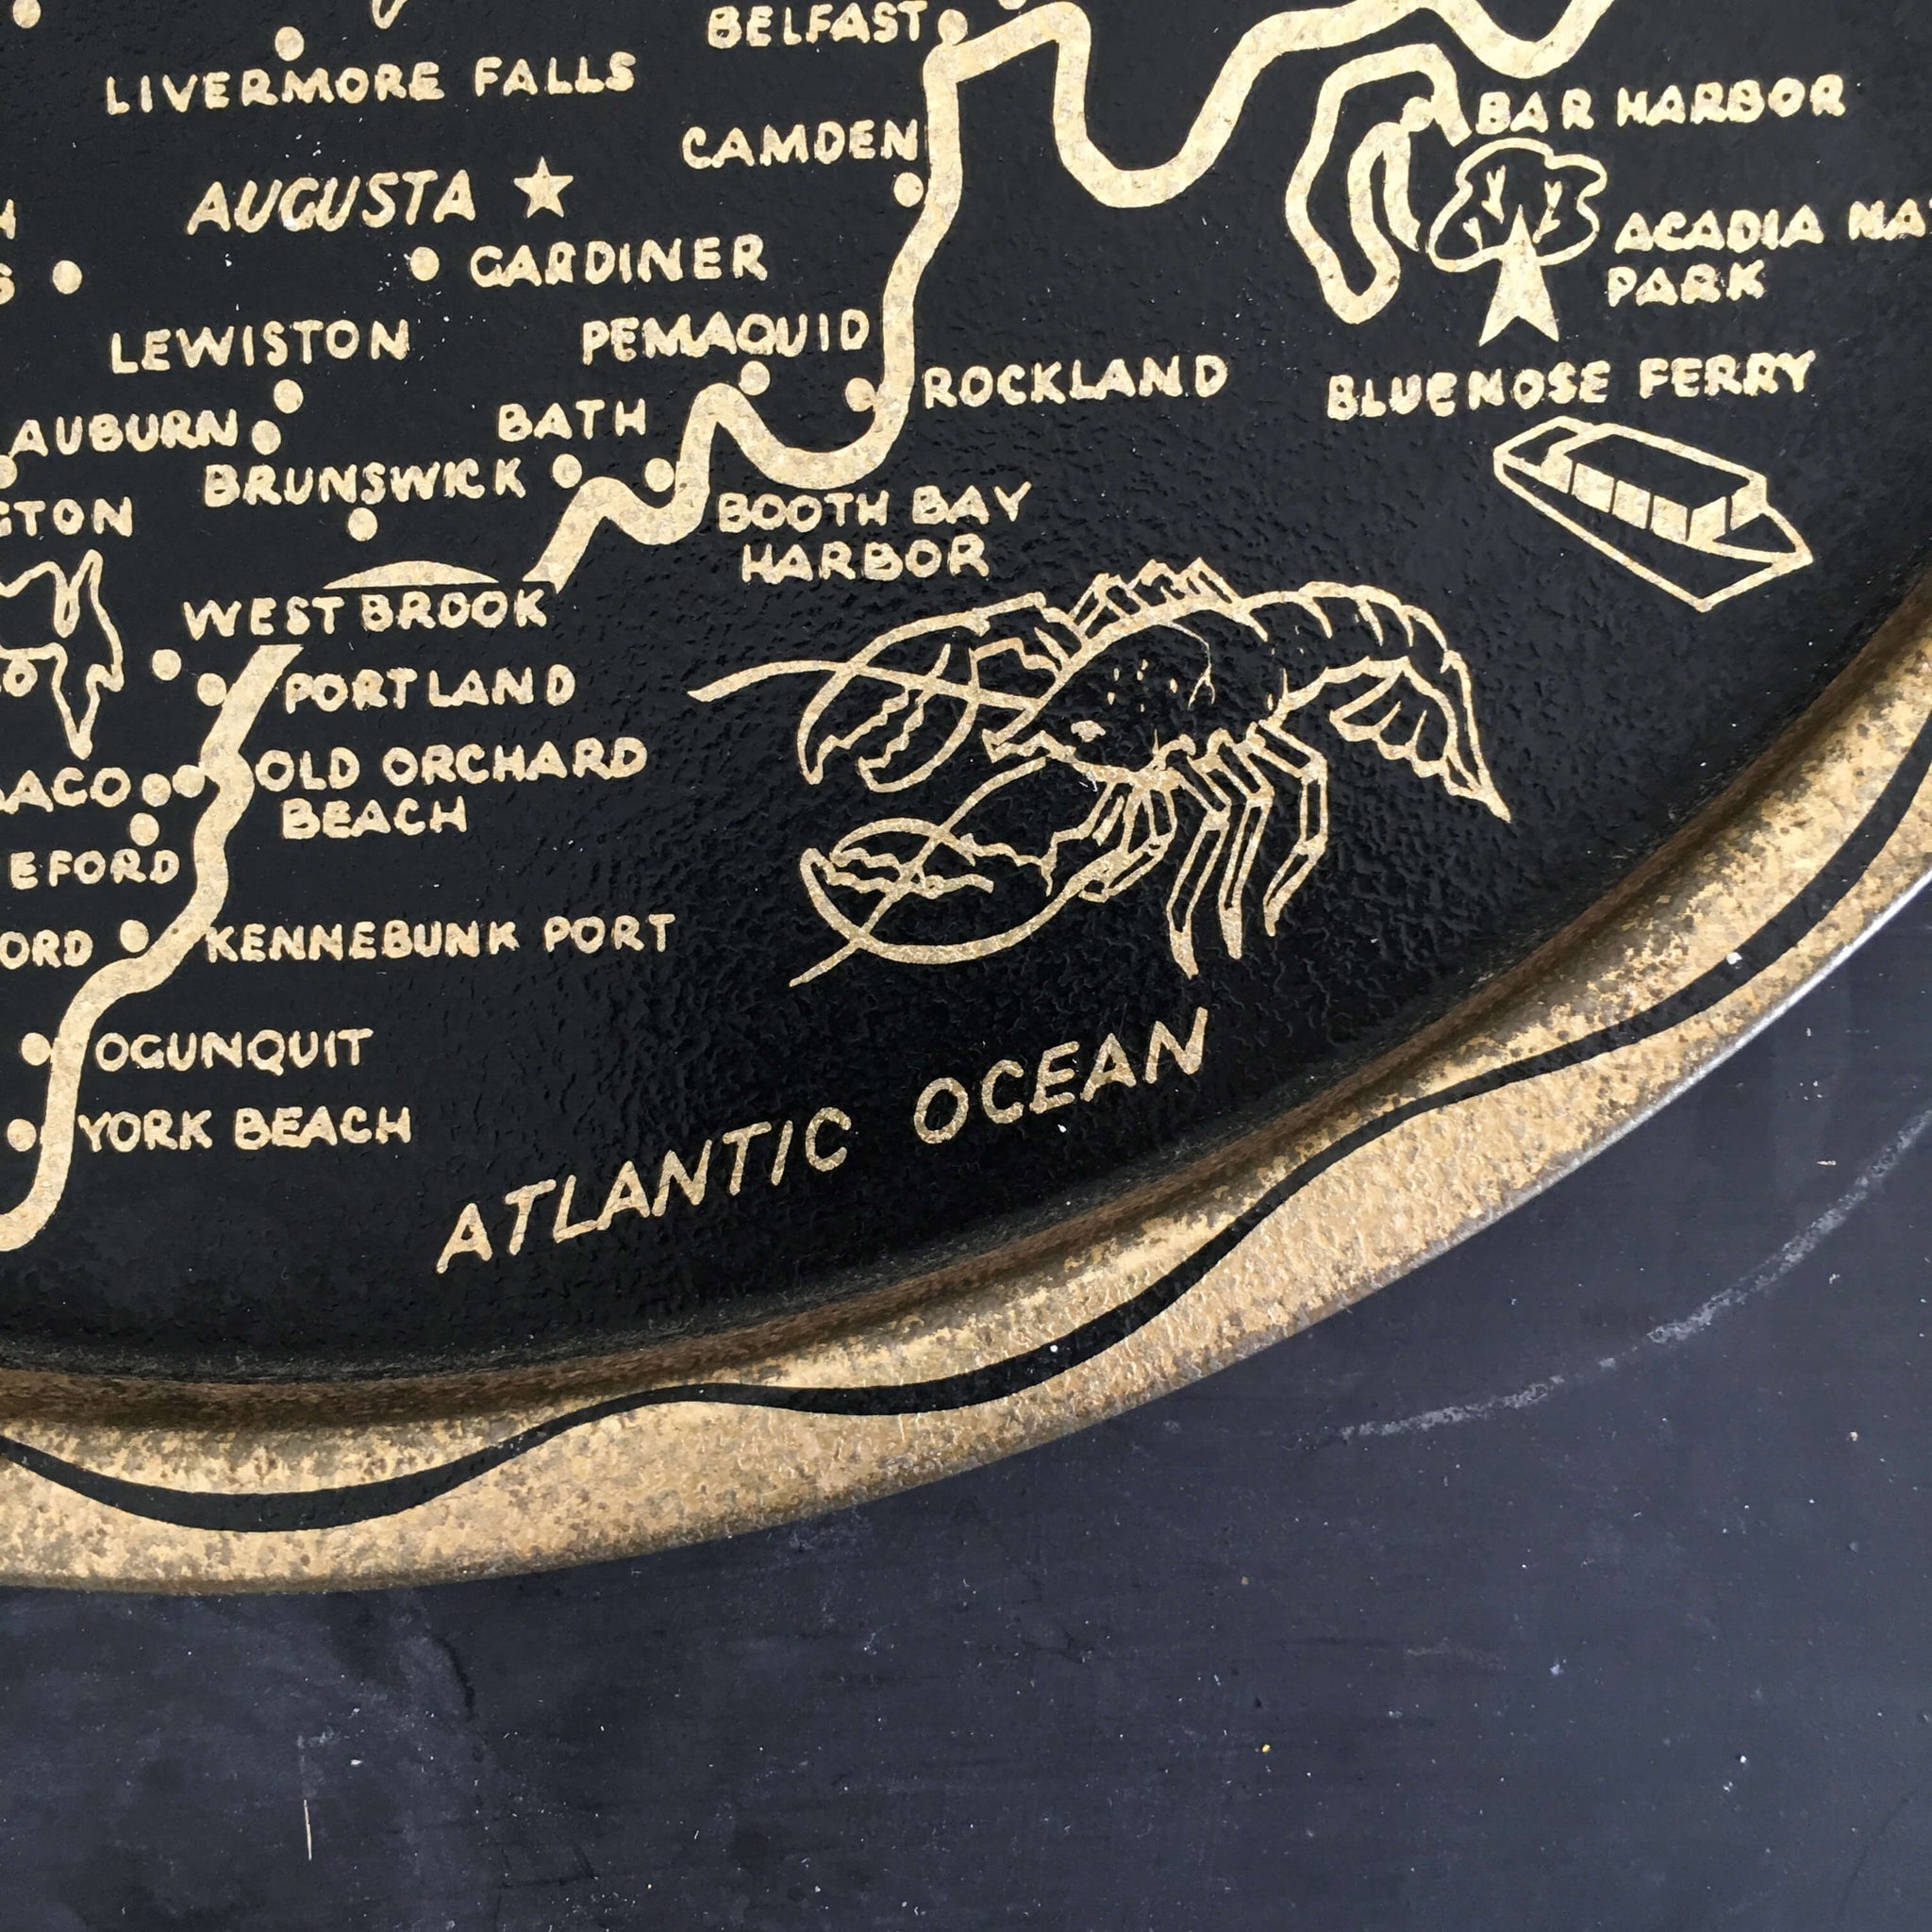 Vintage 1960's  Tin Tray - State of Maine  Travel Souvenir - Black and Gold Travel Collectibles